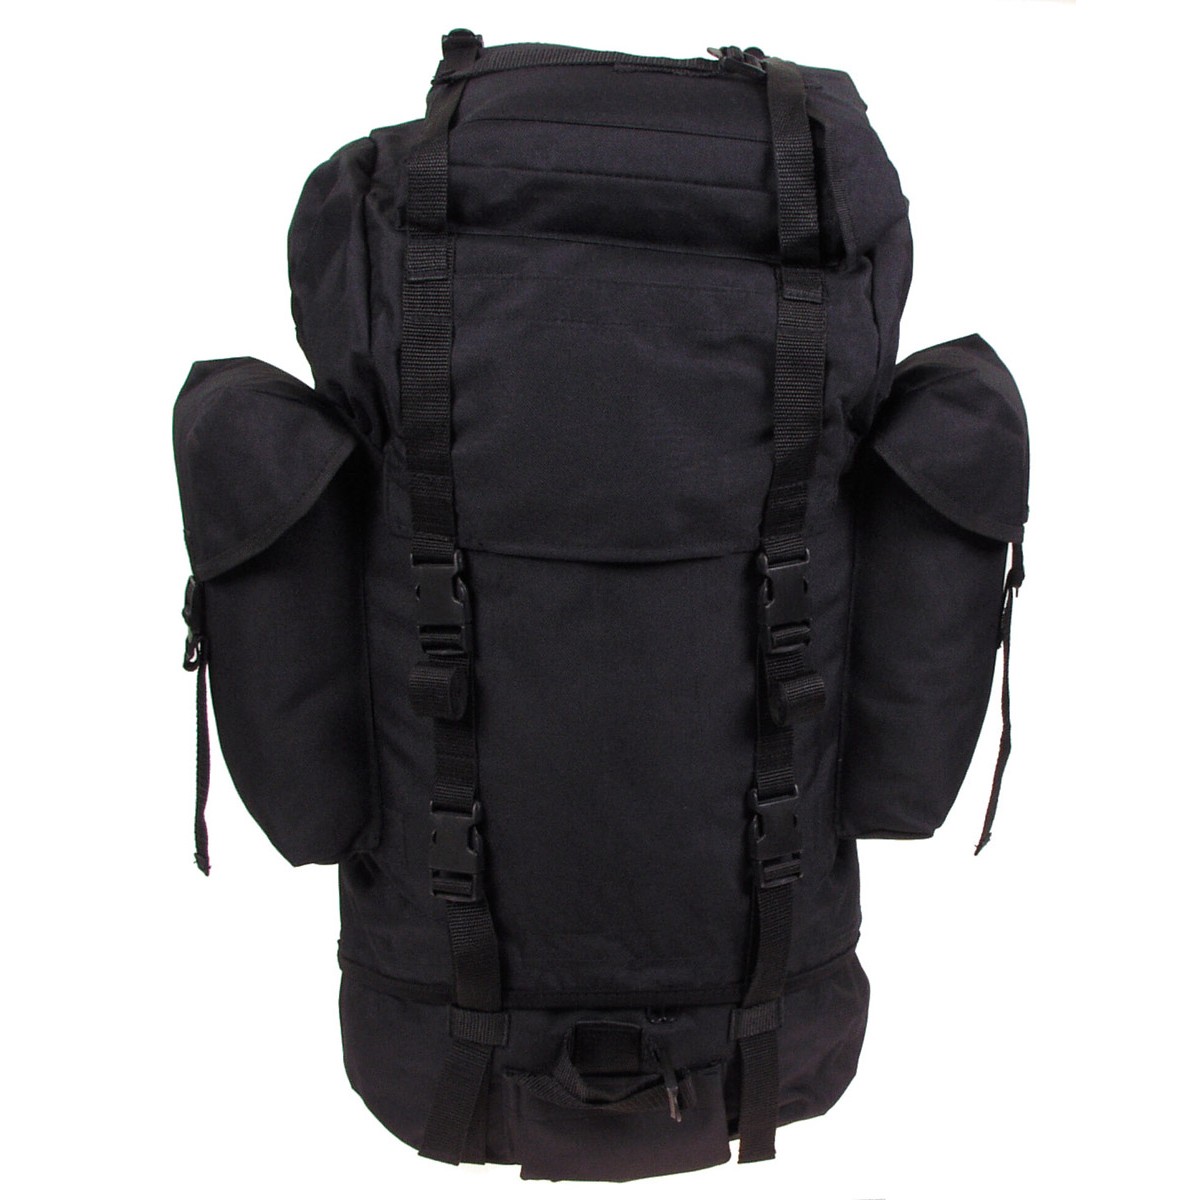 Military Patrol Expedition Backpack Large 65L - Black